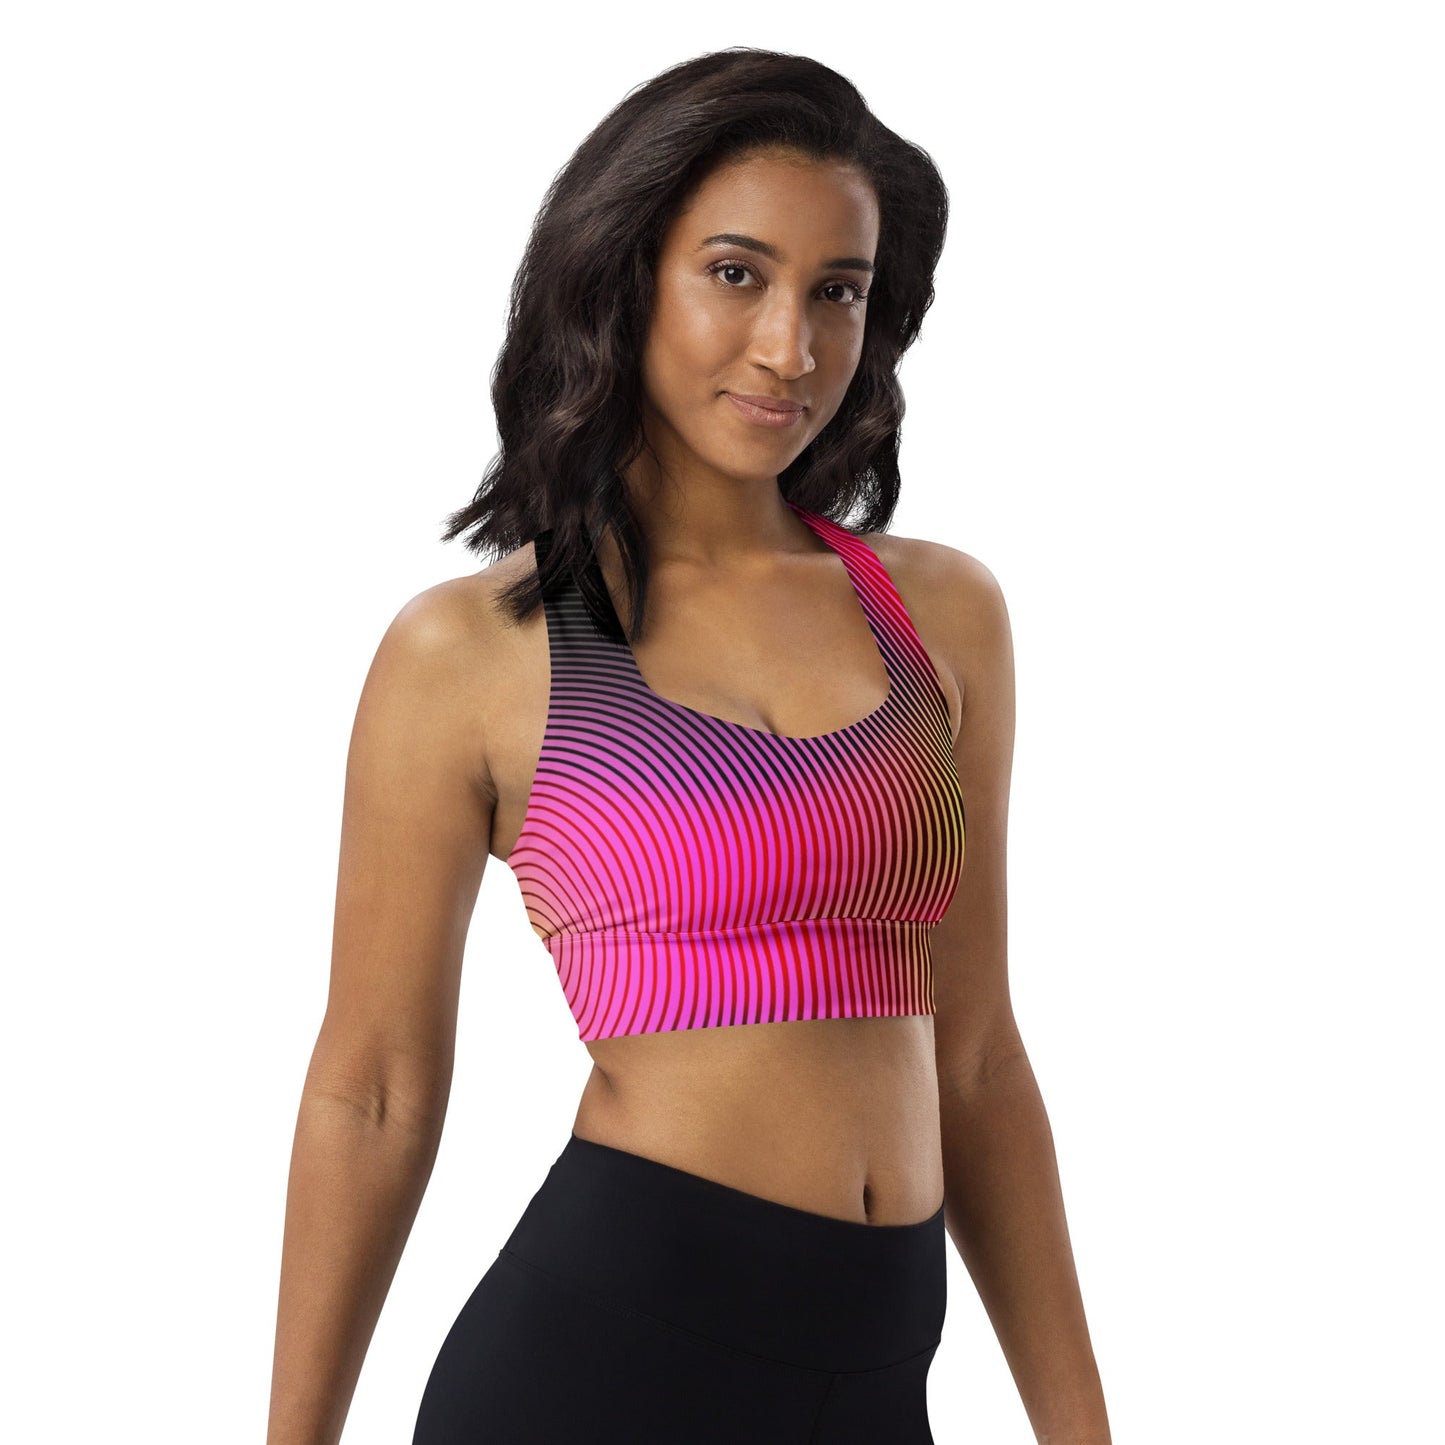 Be Extra! Slay Queen Longline Sports Bra - BeExtra! Apparel & More